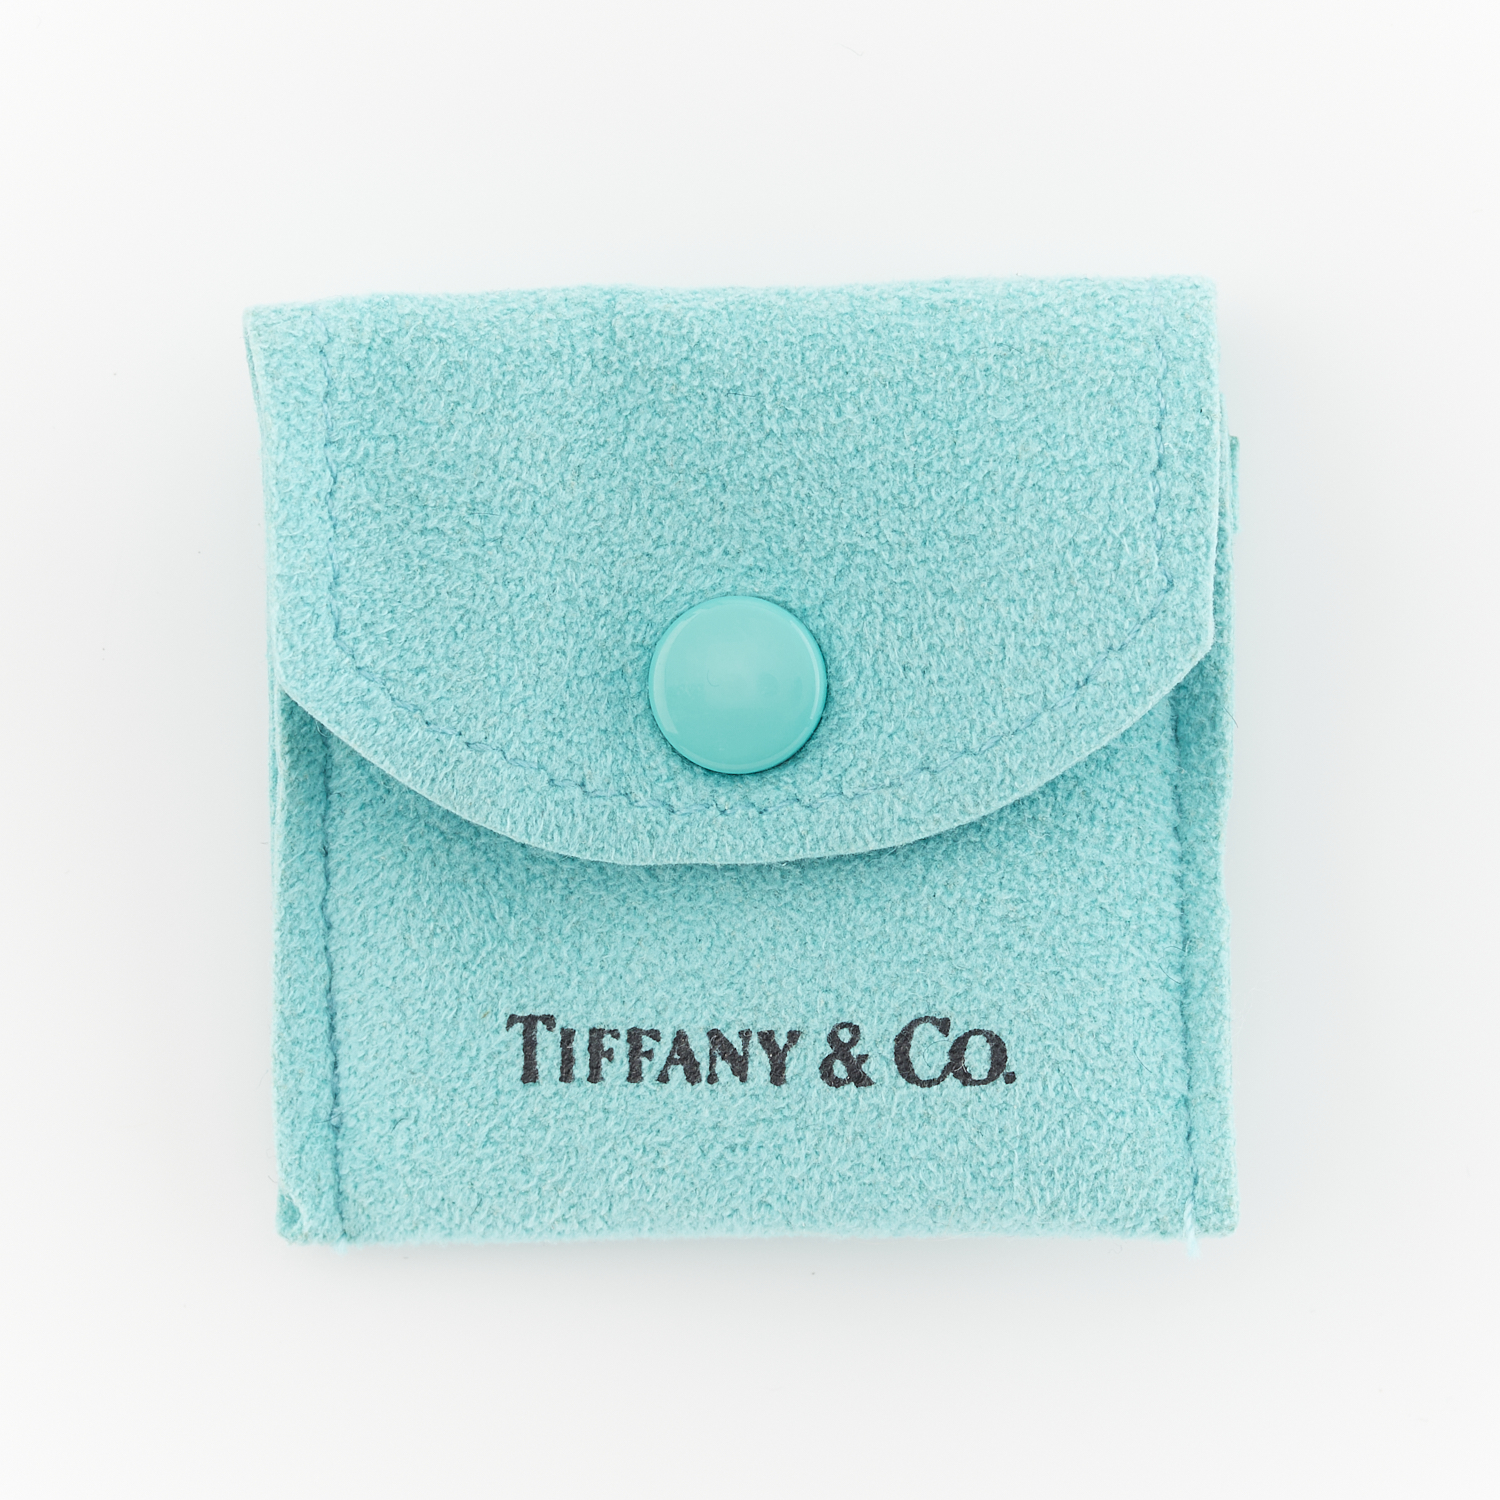 Elsa Peretti for Tiffany & Co. Sterling Initial Necklace - Image 8 of 8